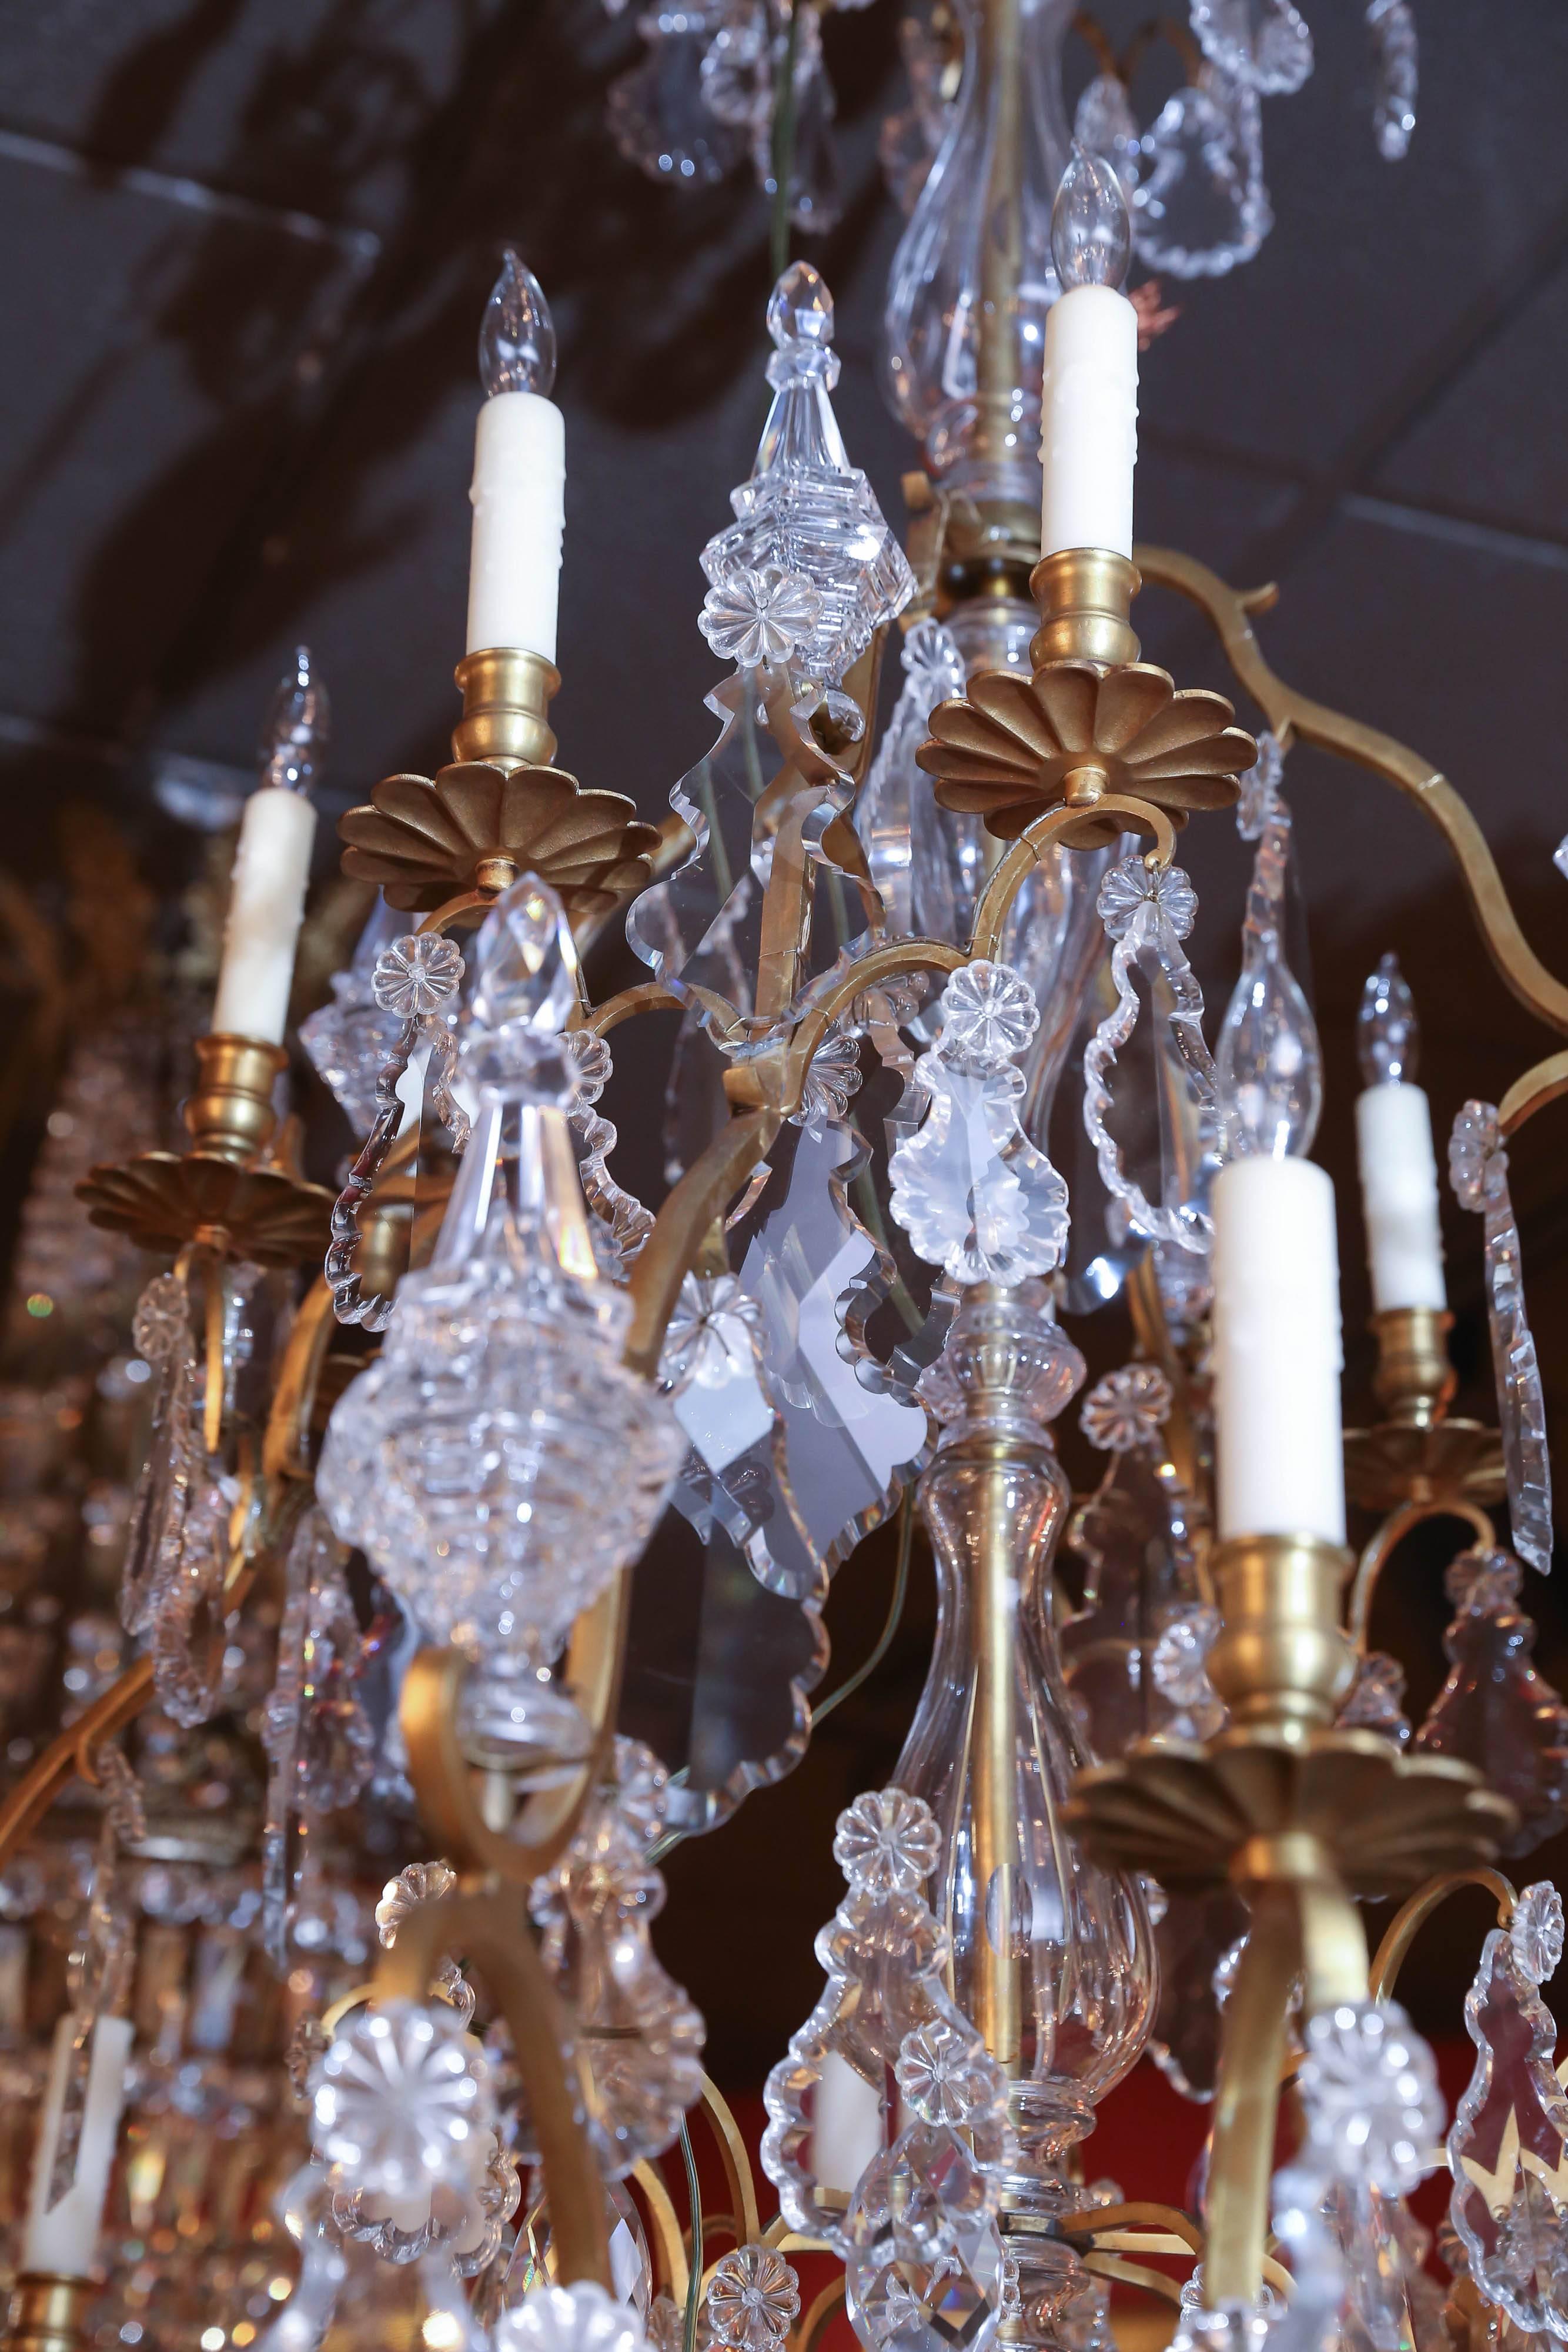 Exrtrodinary gilt bronze and crystal chandelier with a central
shaped stem issuing “S” scrollecarms, cut crystal pendants and
Finials throughout, ending in crystal globe drop
Found in Paris.